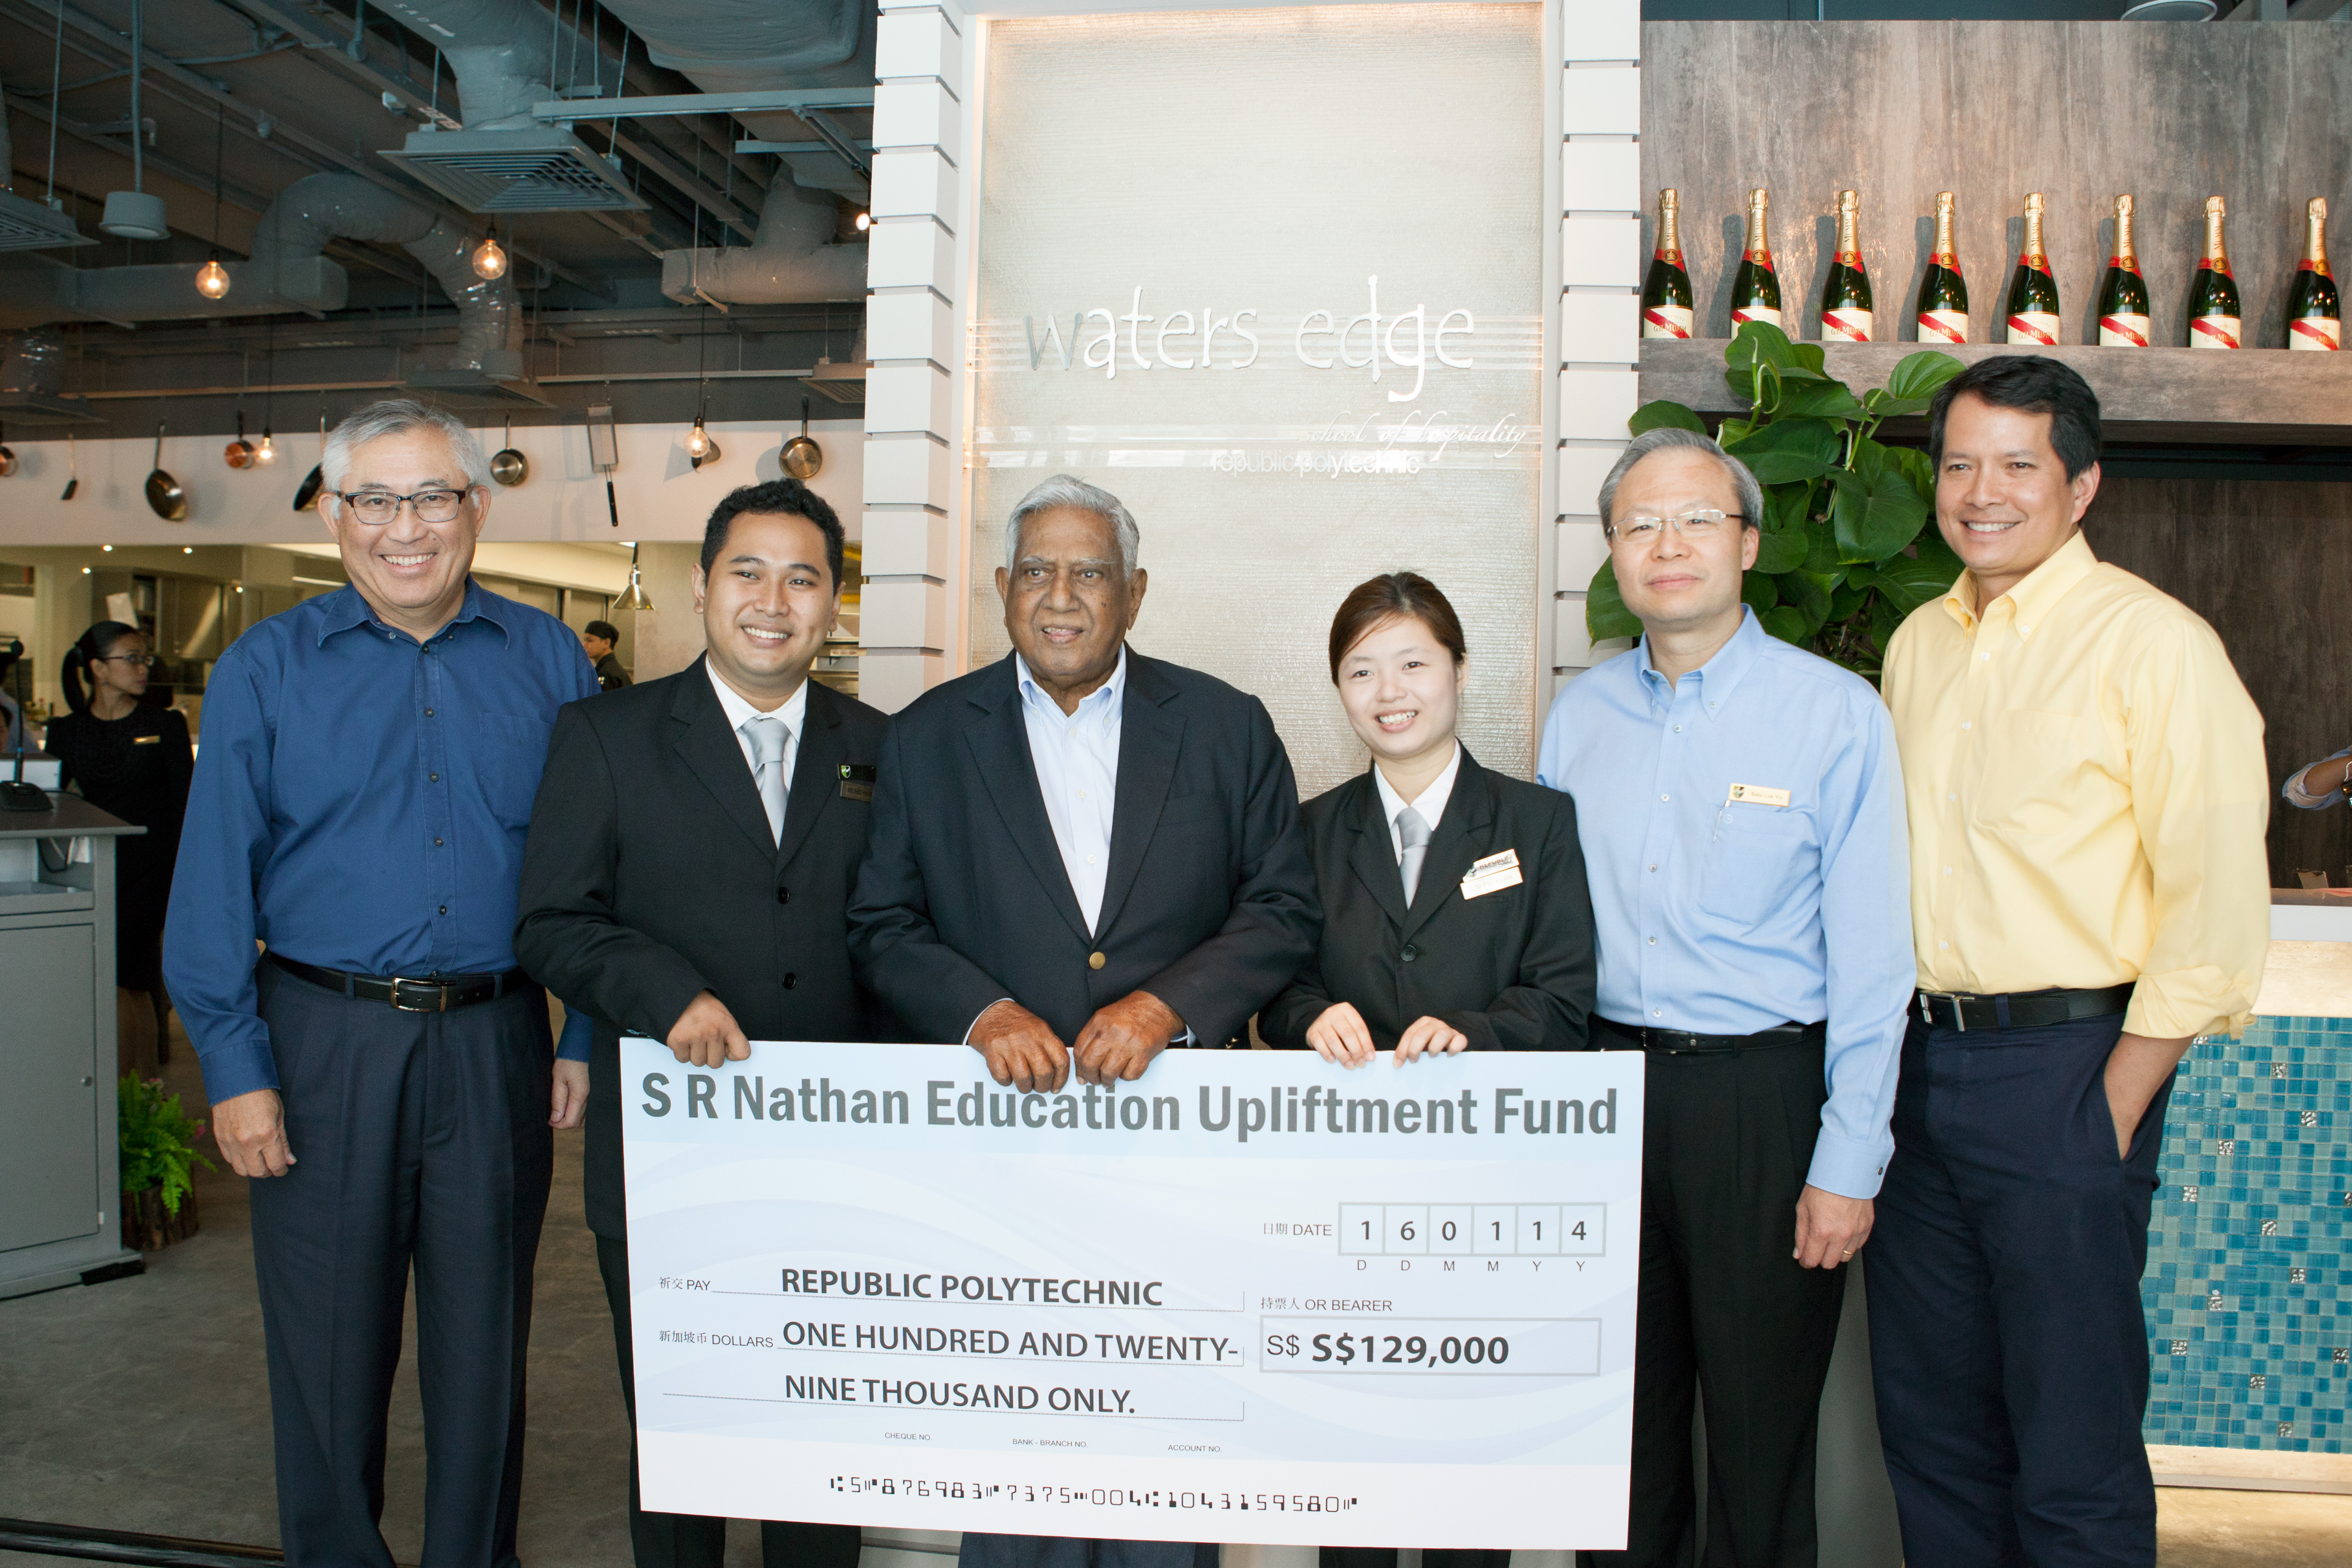 GENEROUS SPIRIT: Mr S R Nathan presents a $129,000 cheque to RP that will help students who struggle with finances. The cheque presentation ceremony was held at the student-run restaurant,  Waters Edge. Photo: Republic Polytechnic